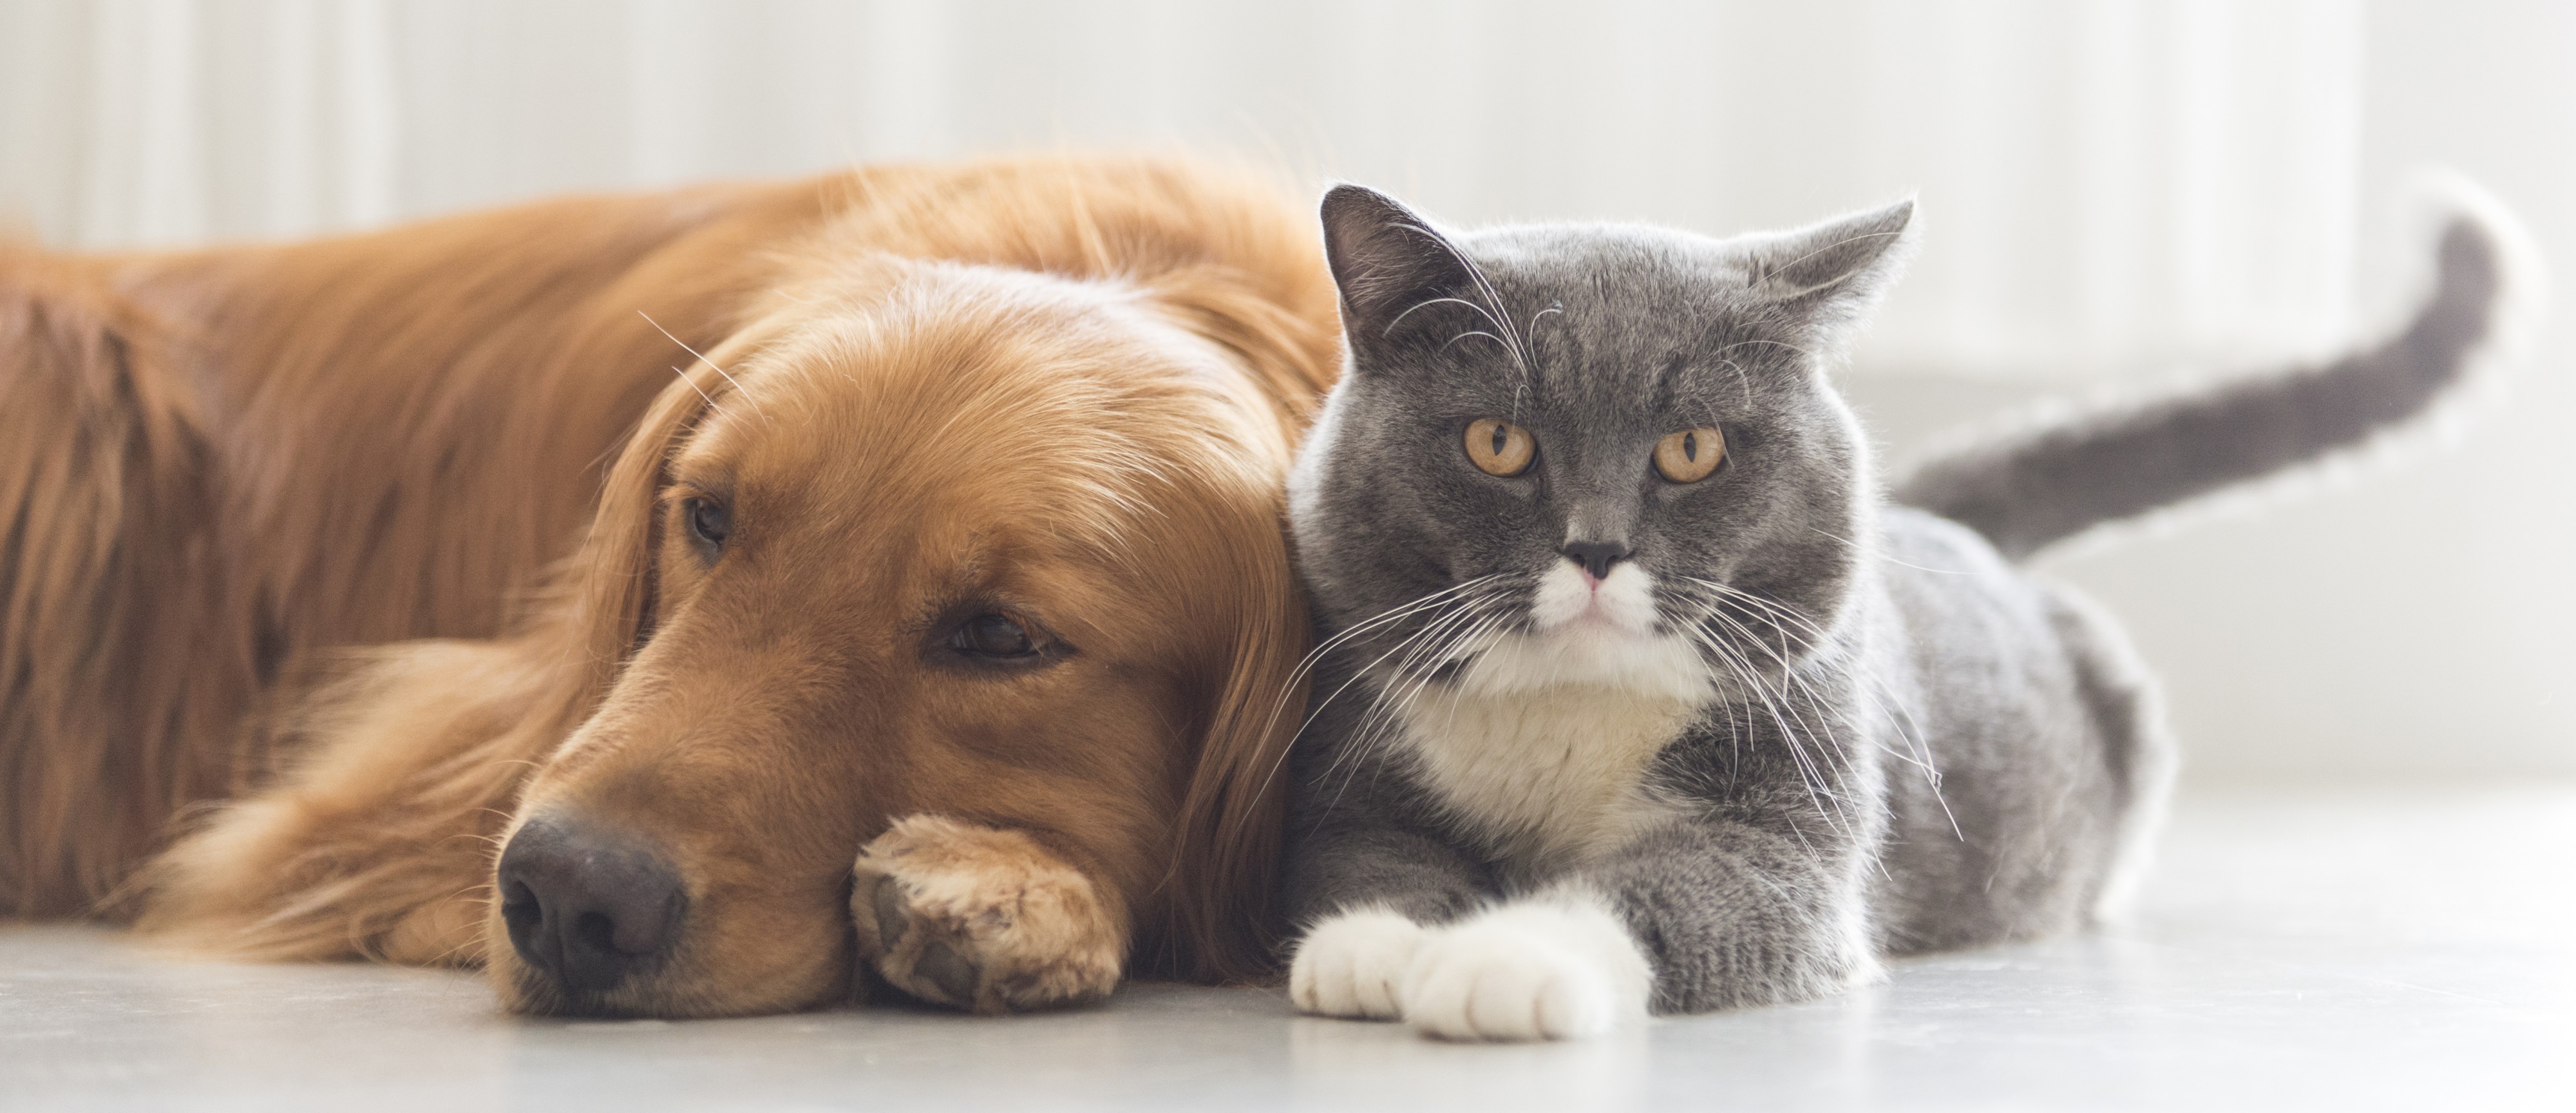 Image of Dog and Cat